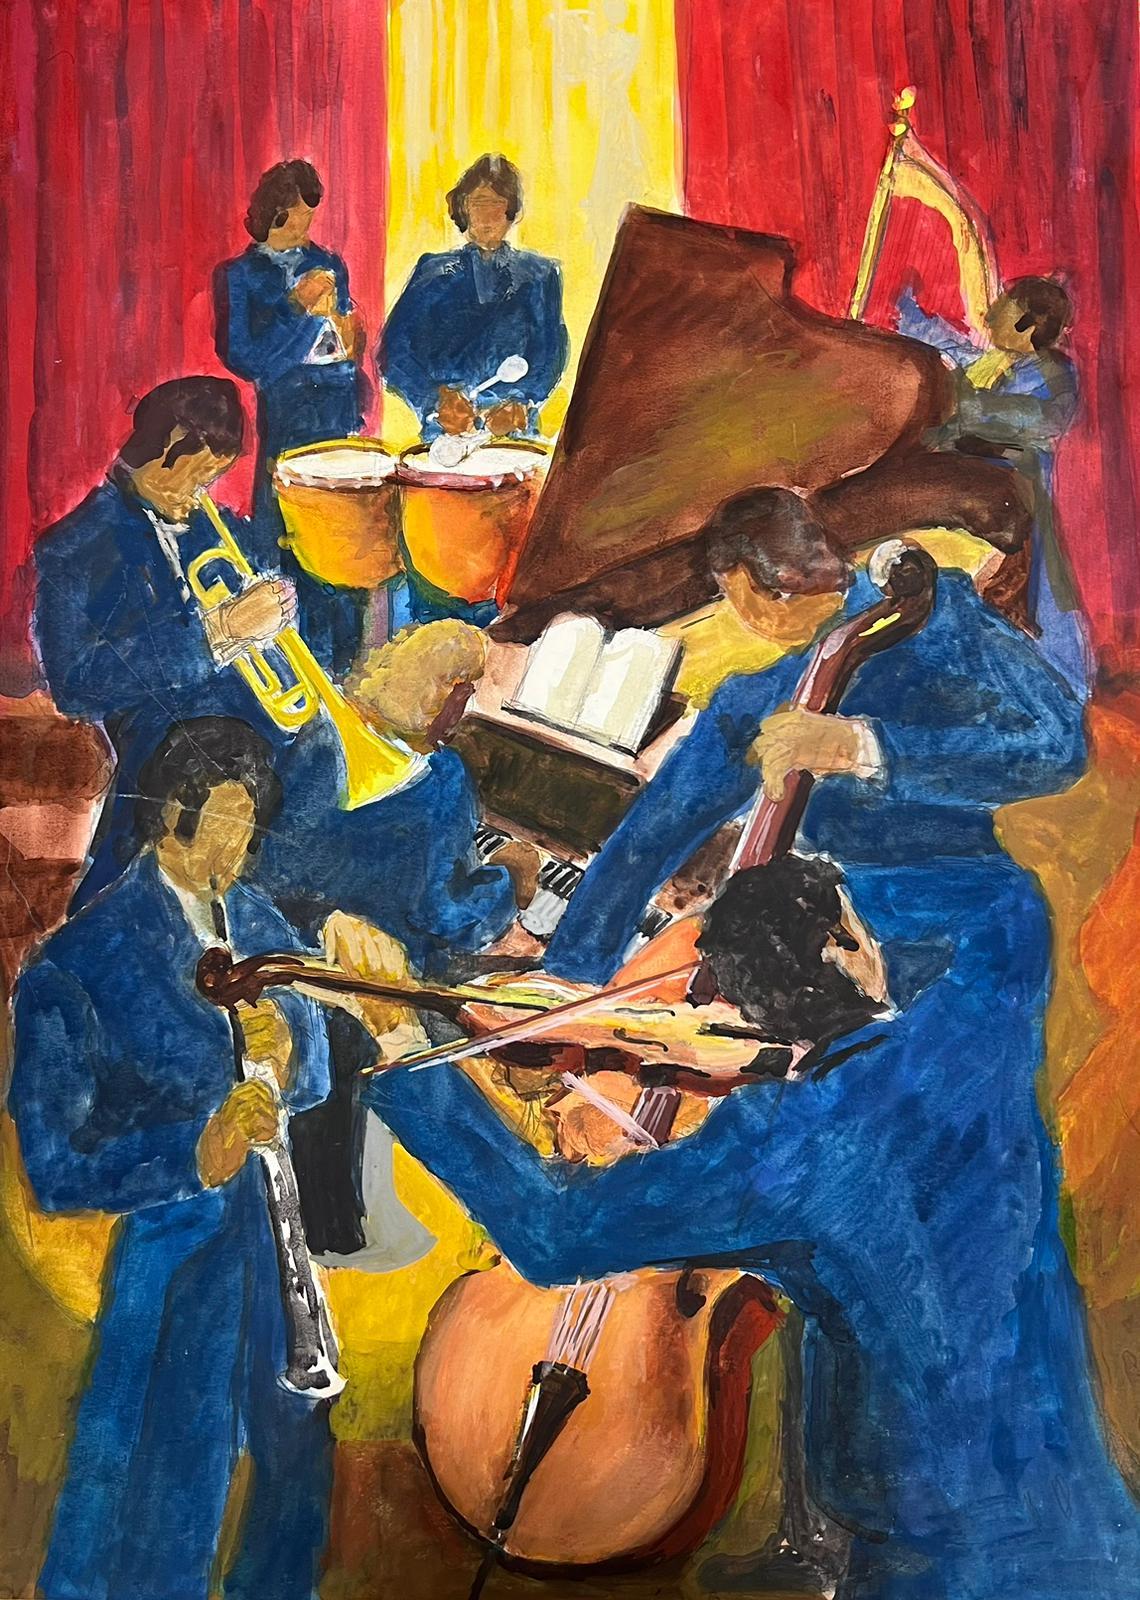 Guy Nicod Figurative Painting - The Orchestra Jazz Band Superb 20th Century French Modernist Painting